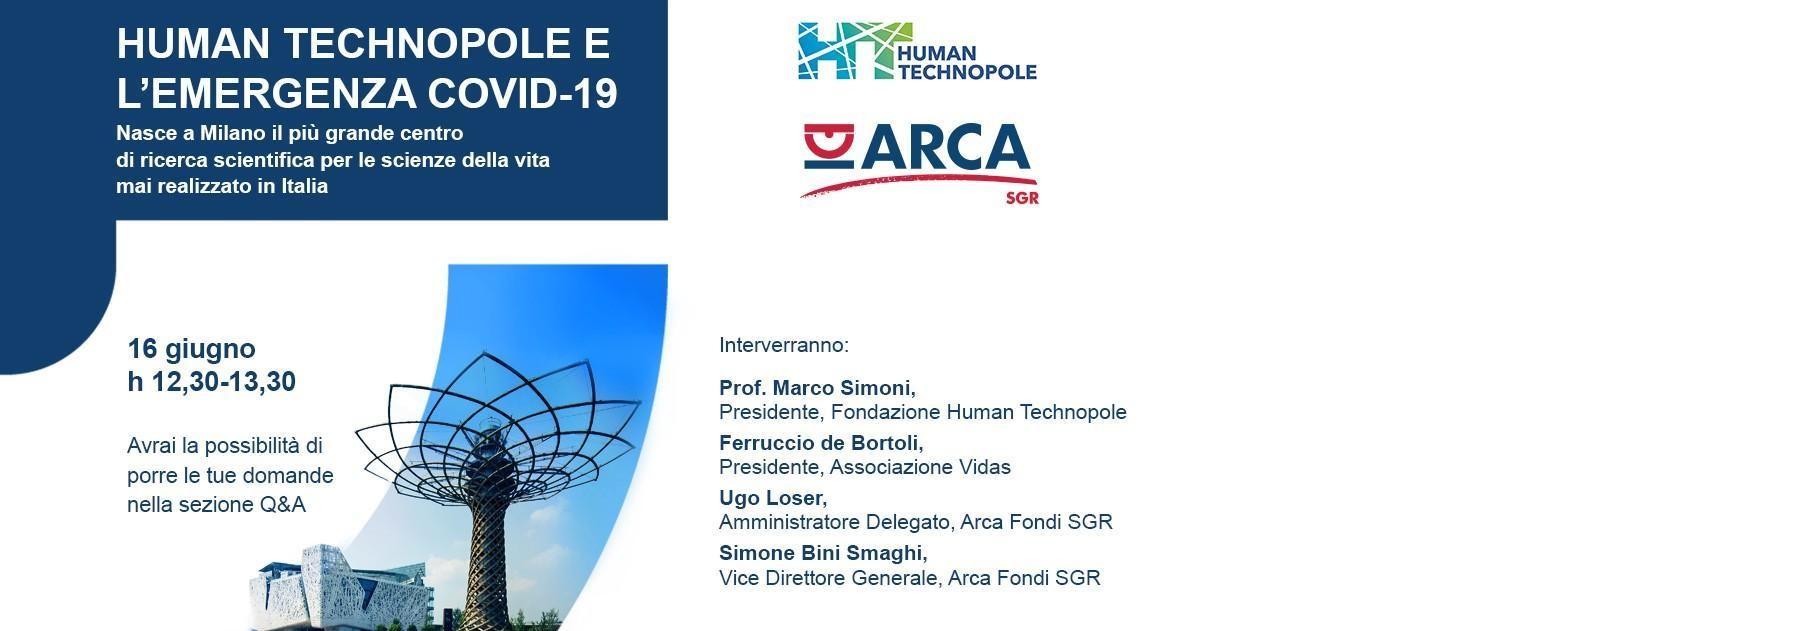 On June 16th, President Marco Simoni will talk about the Human Technopole project and the role of scientific research for the post COVID restart19.